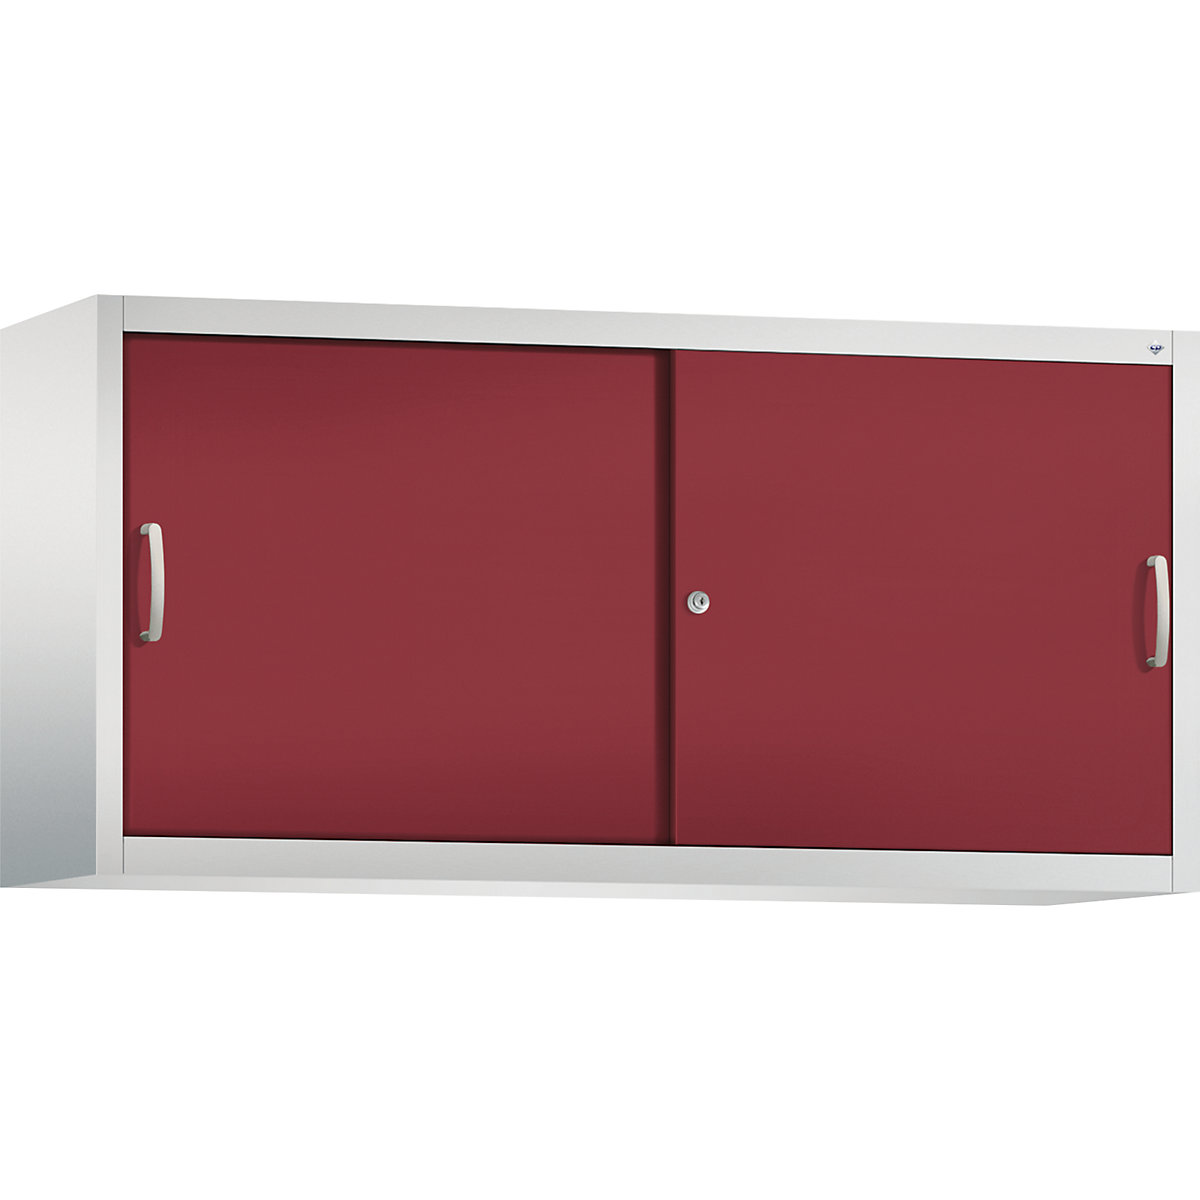 ACURADO add-on cupboard with sliding doors – C+P, 2 shelves, HxWxD 790 x 1600 x 400 mm, light grey / ruby red-4